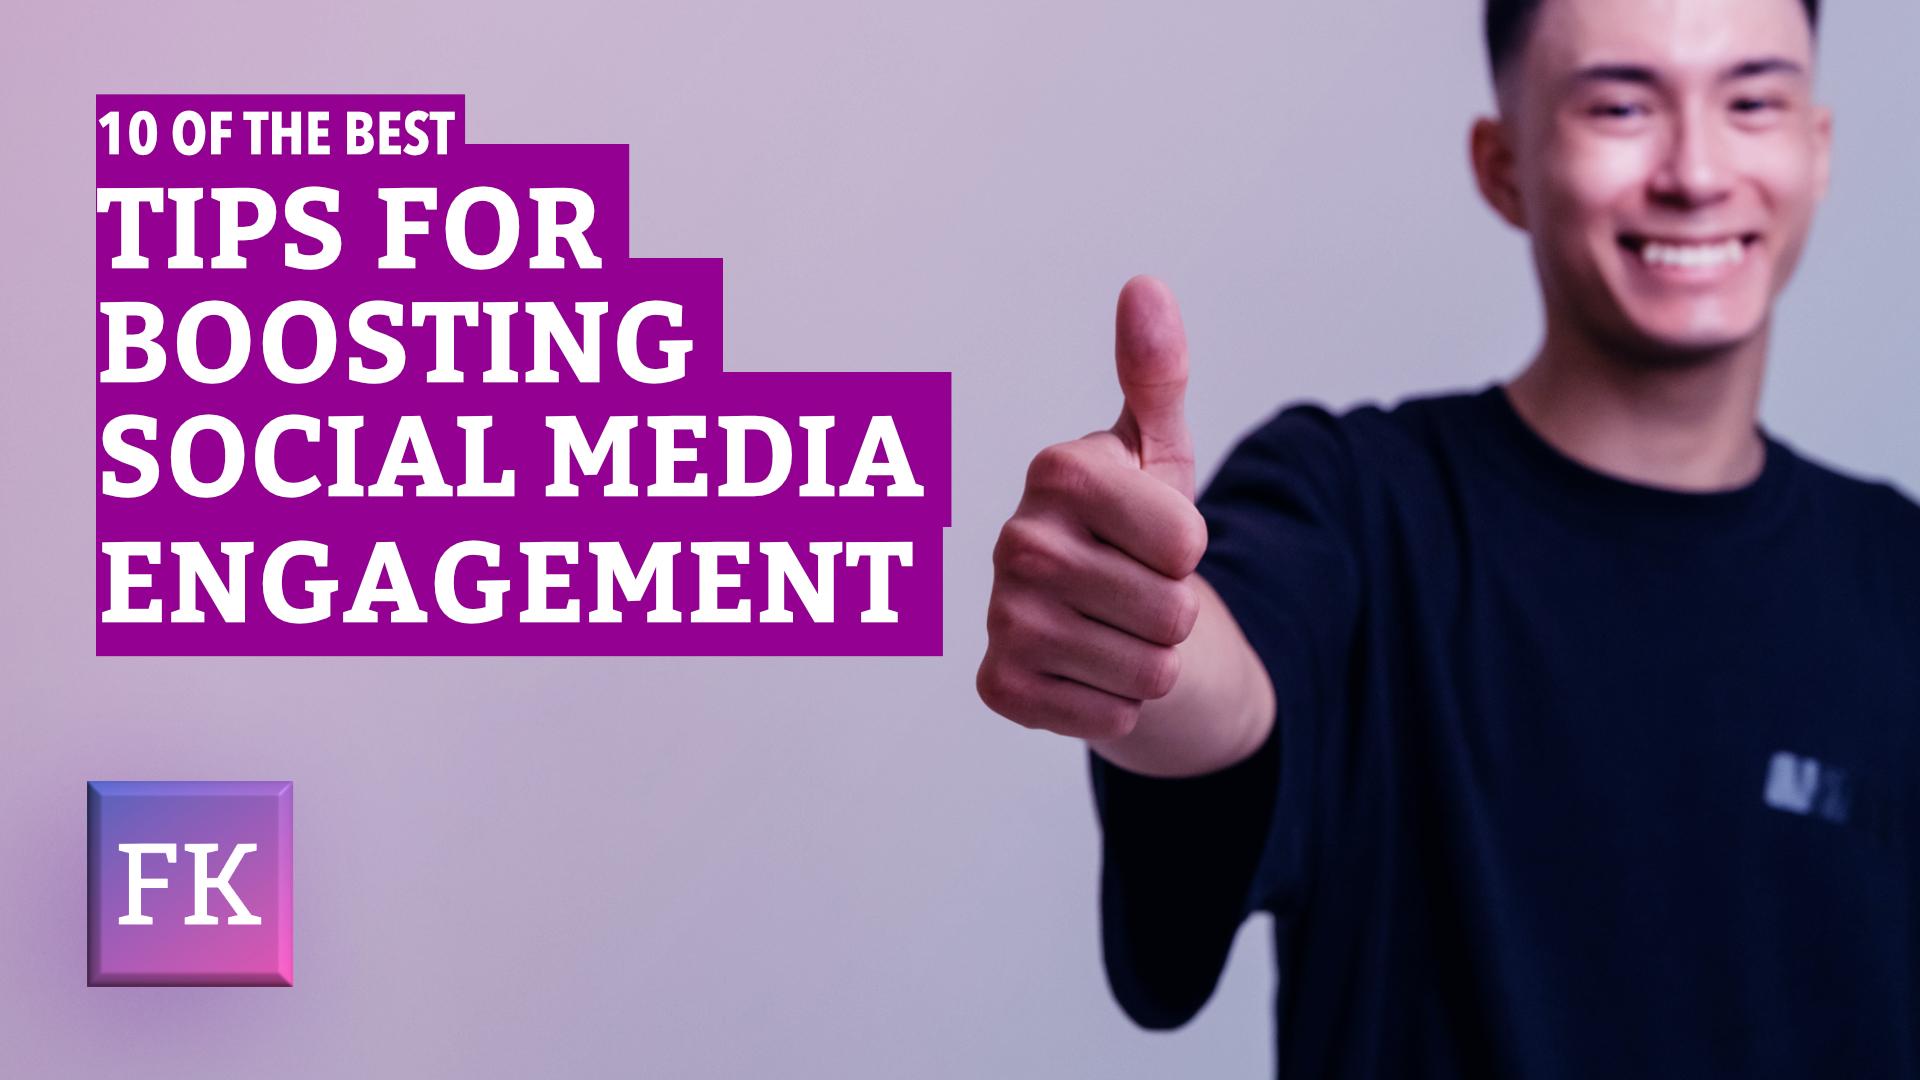 Boost Social Media Engagement | Get more likes